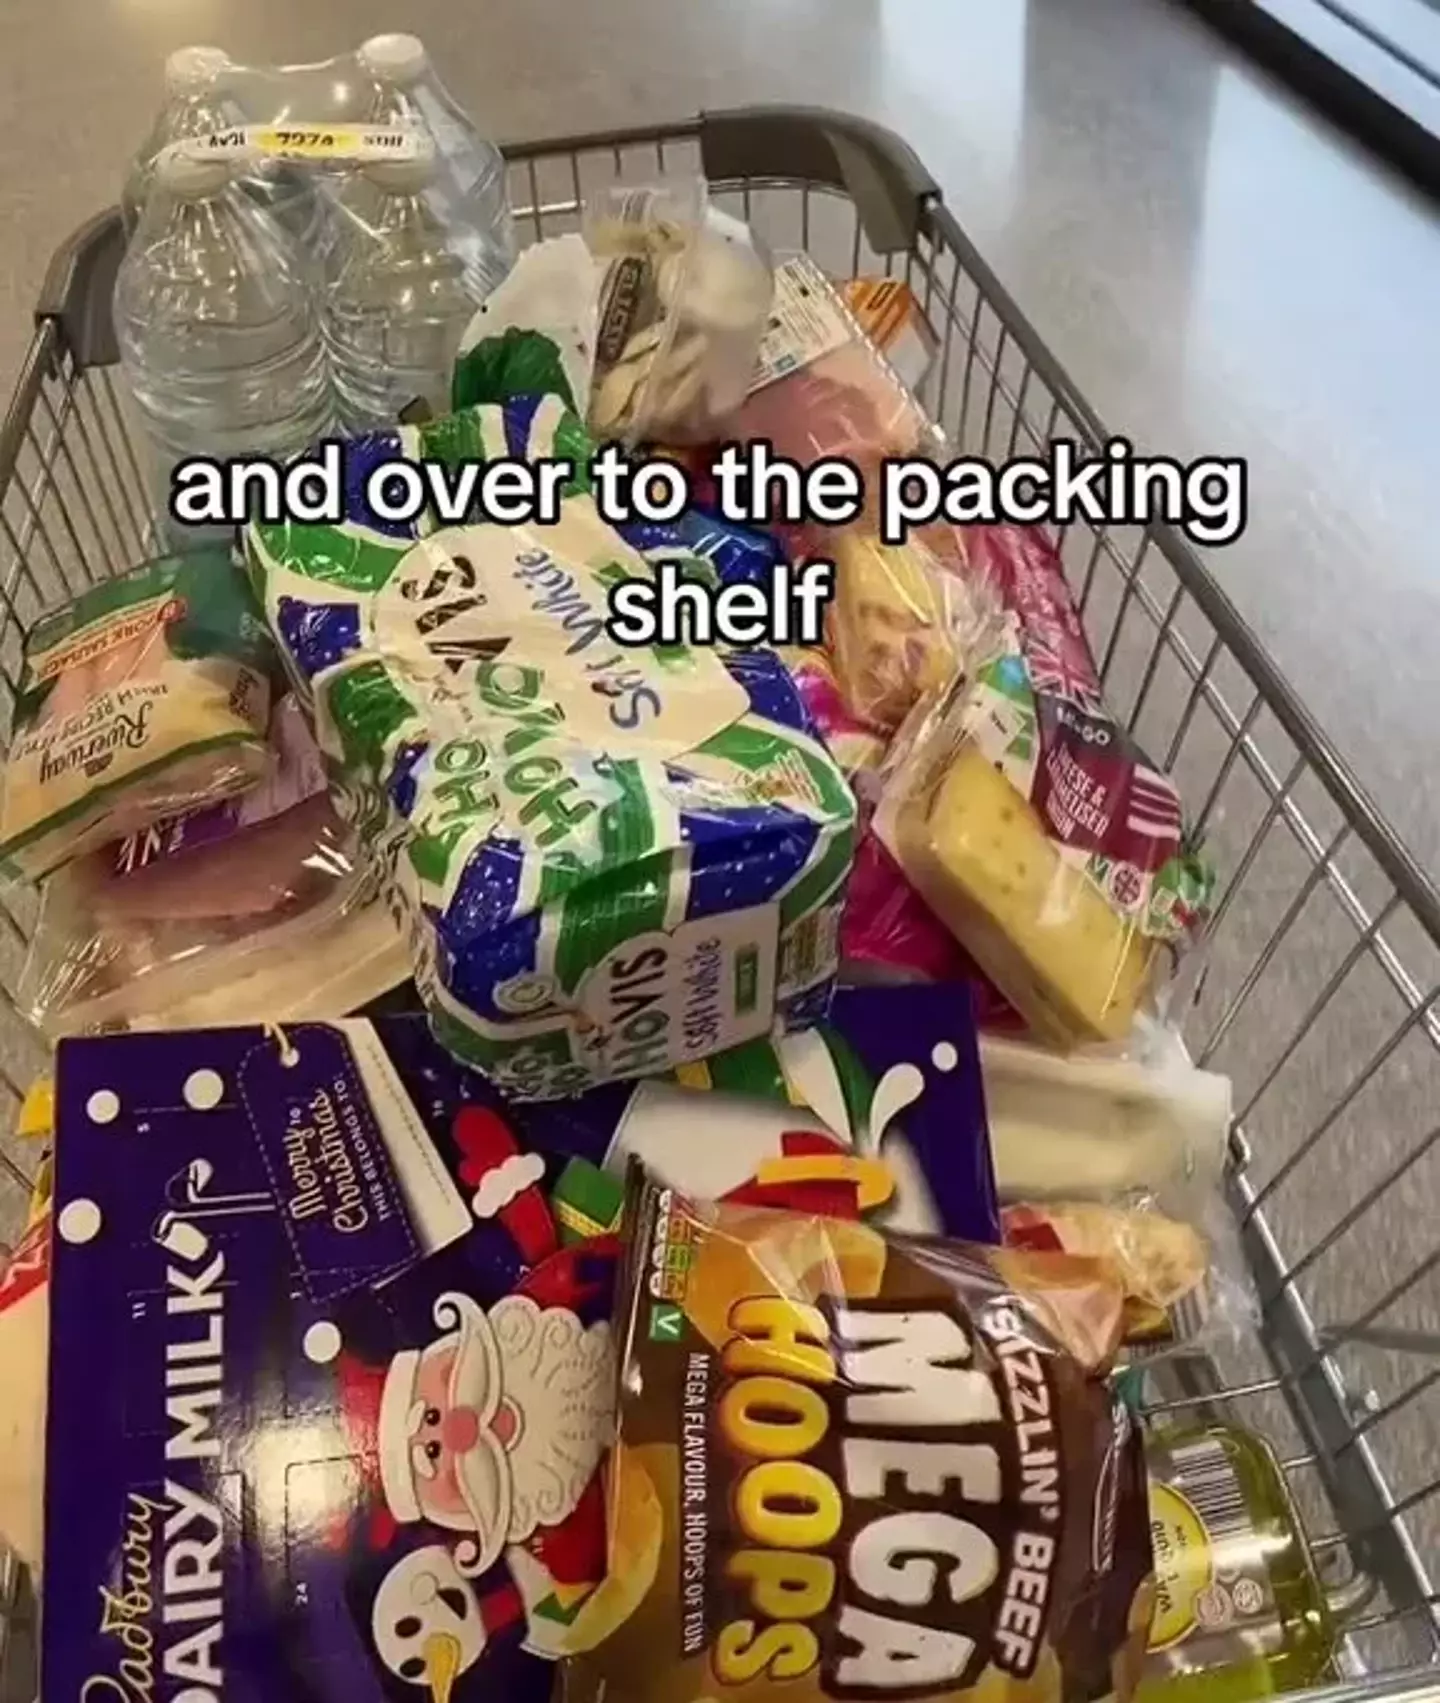 TikTok account 'Cooking with Tubz' has divided the crowd with his video on how to avoid the chaos of Aldi's checkout system.